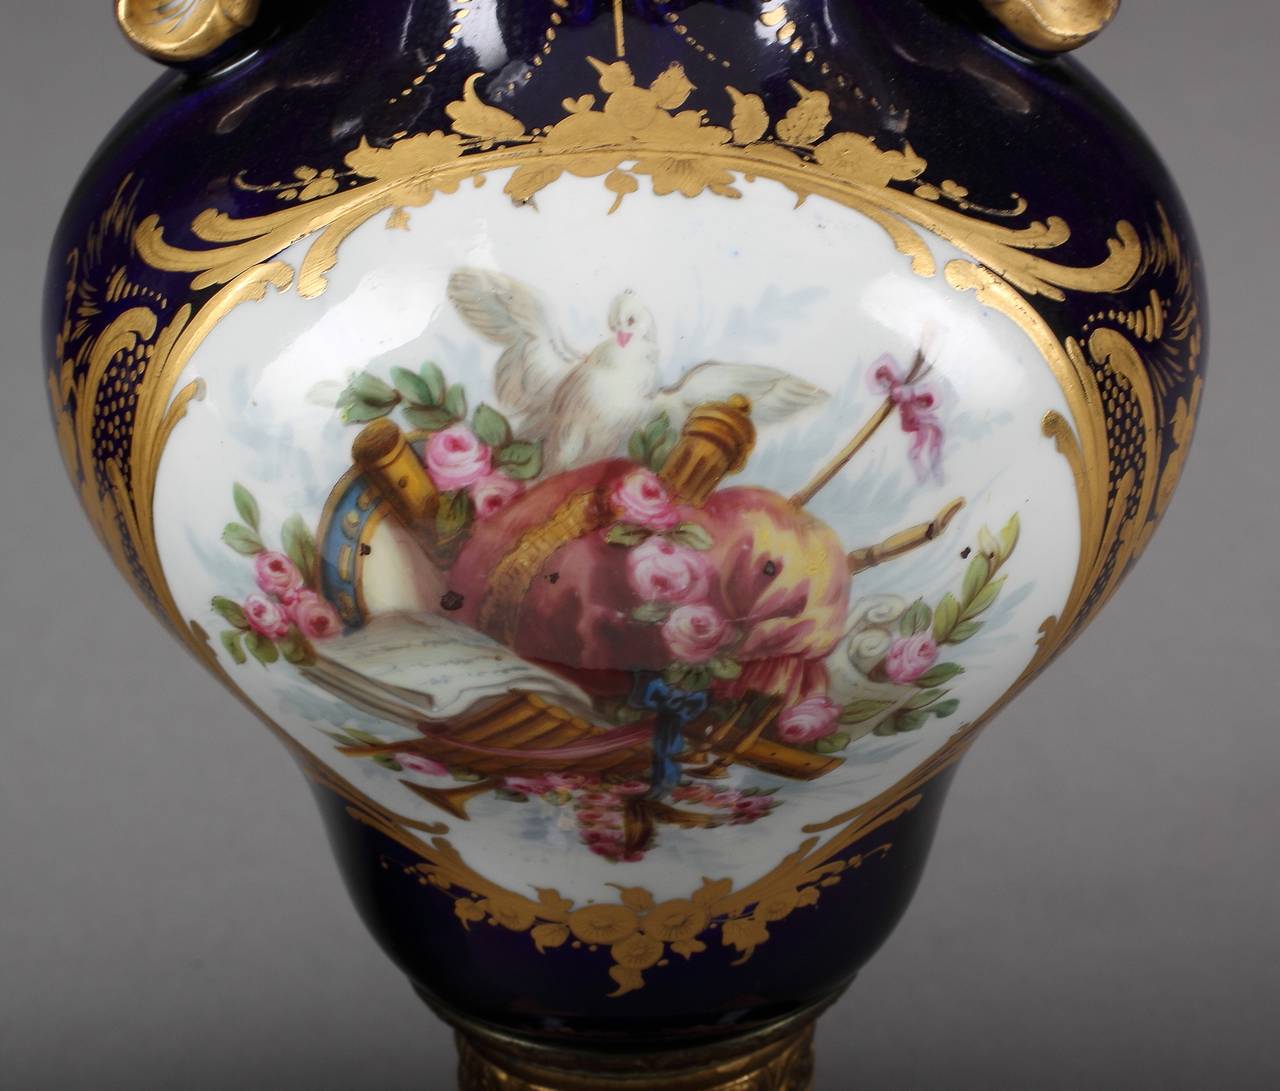 19th Century Fine Pair of French Hand-Painted Sèvres and Jeweled Portrait Vases For Sale